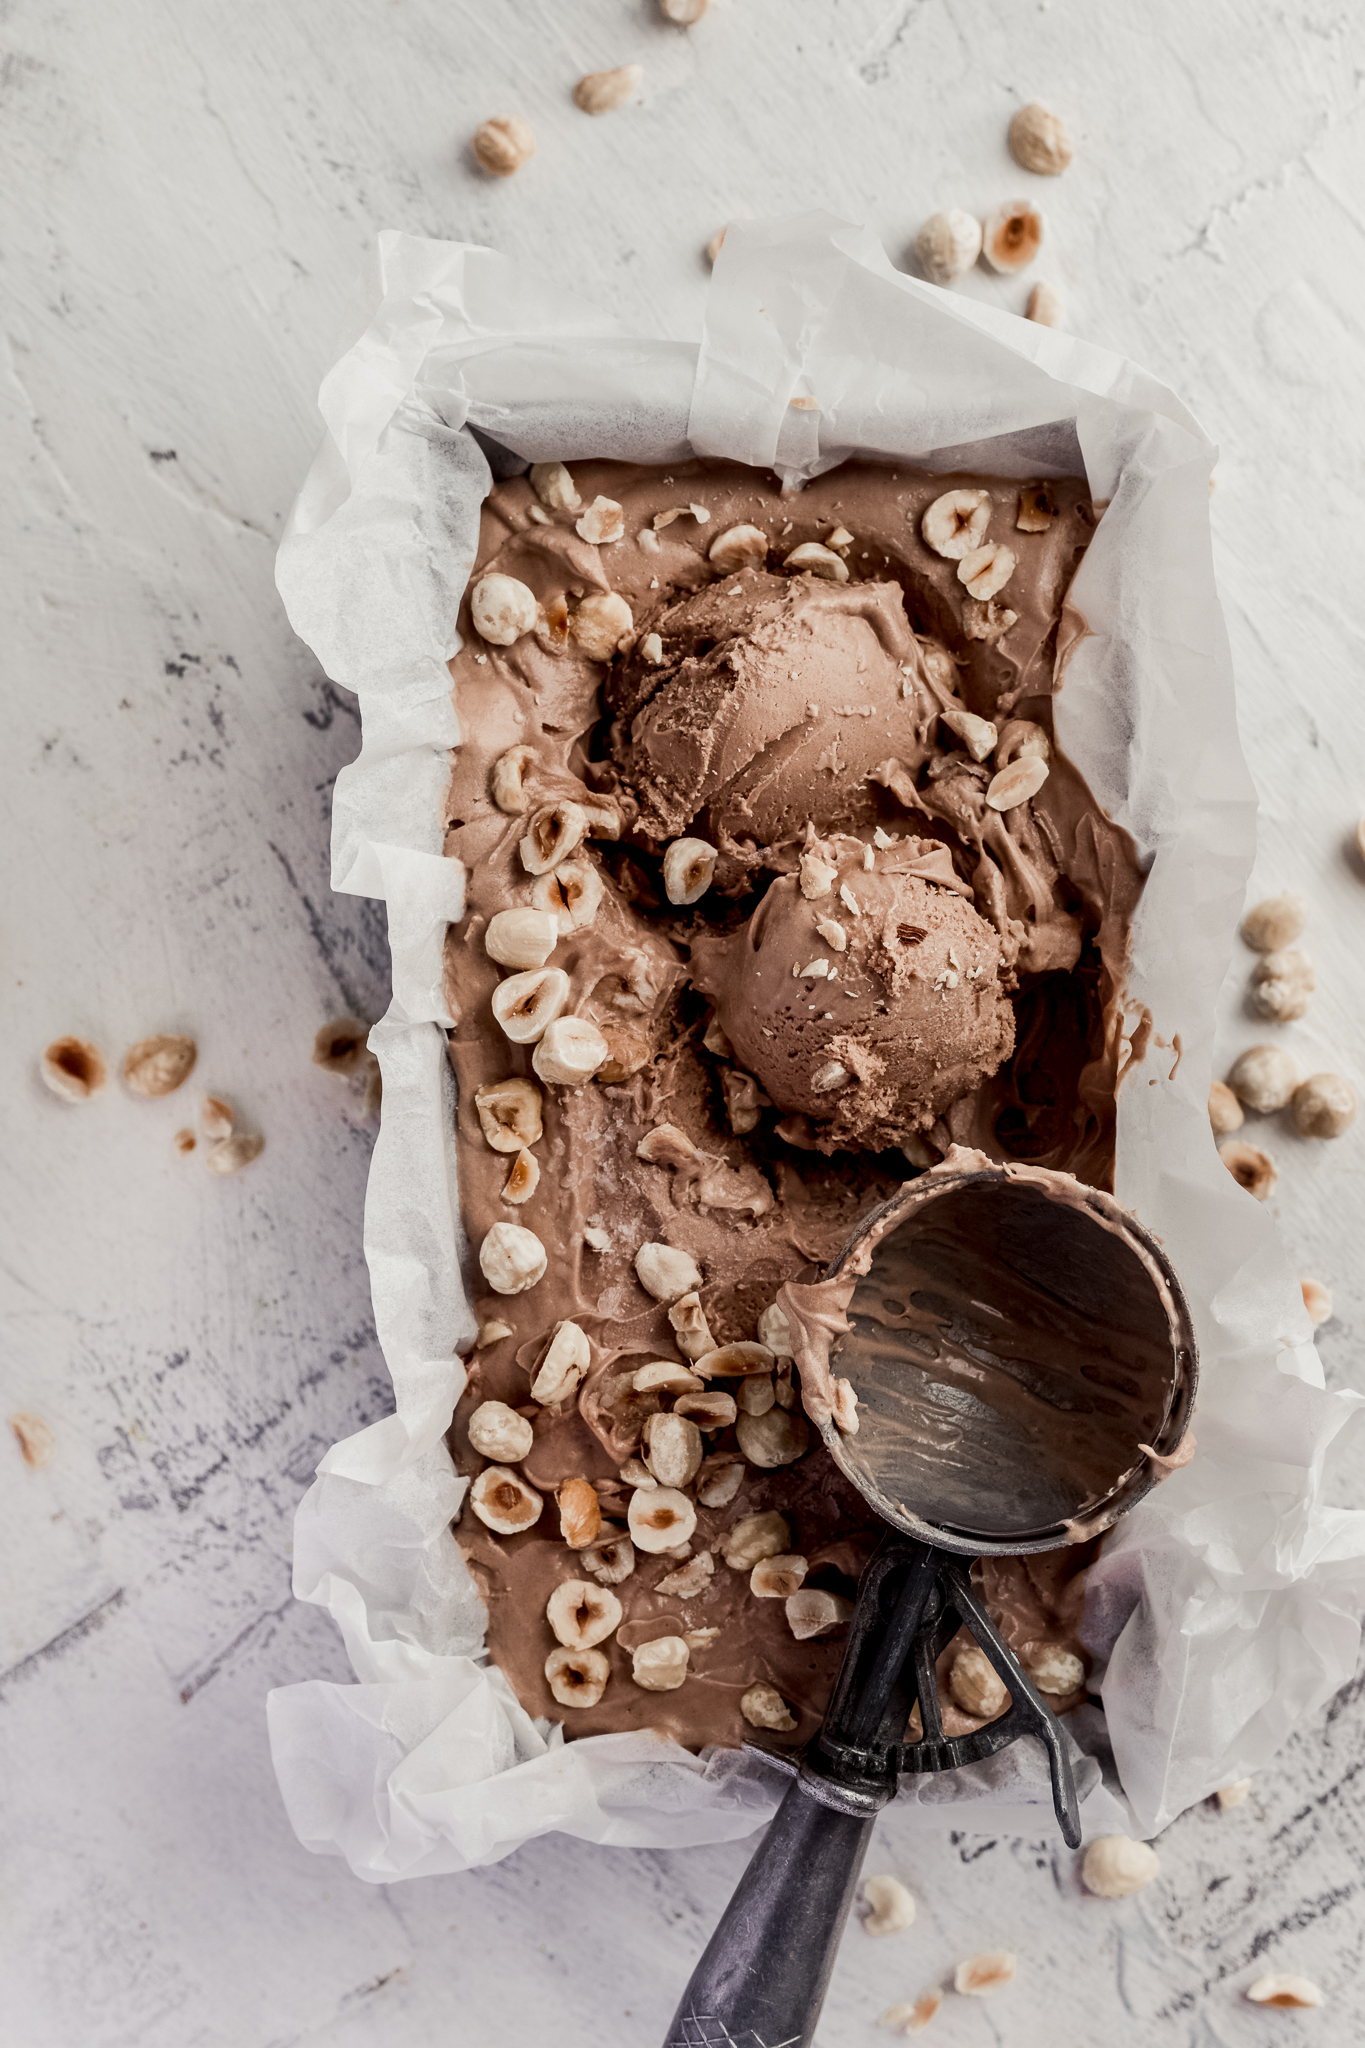 nutella ice cream in a vintage tray with a vintage scoop